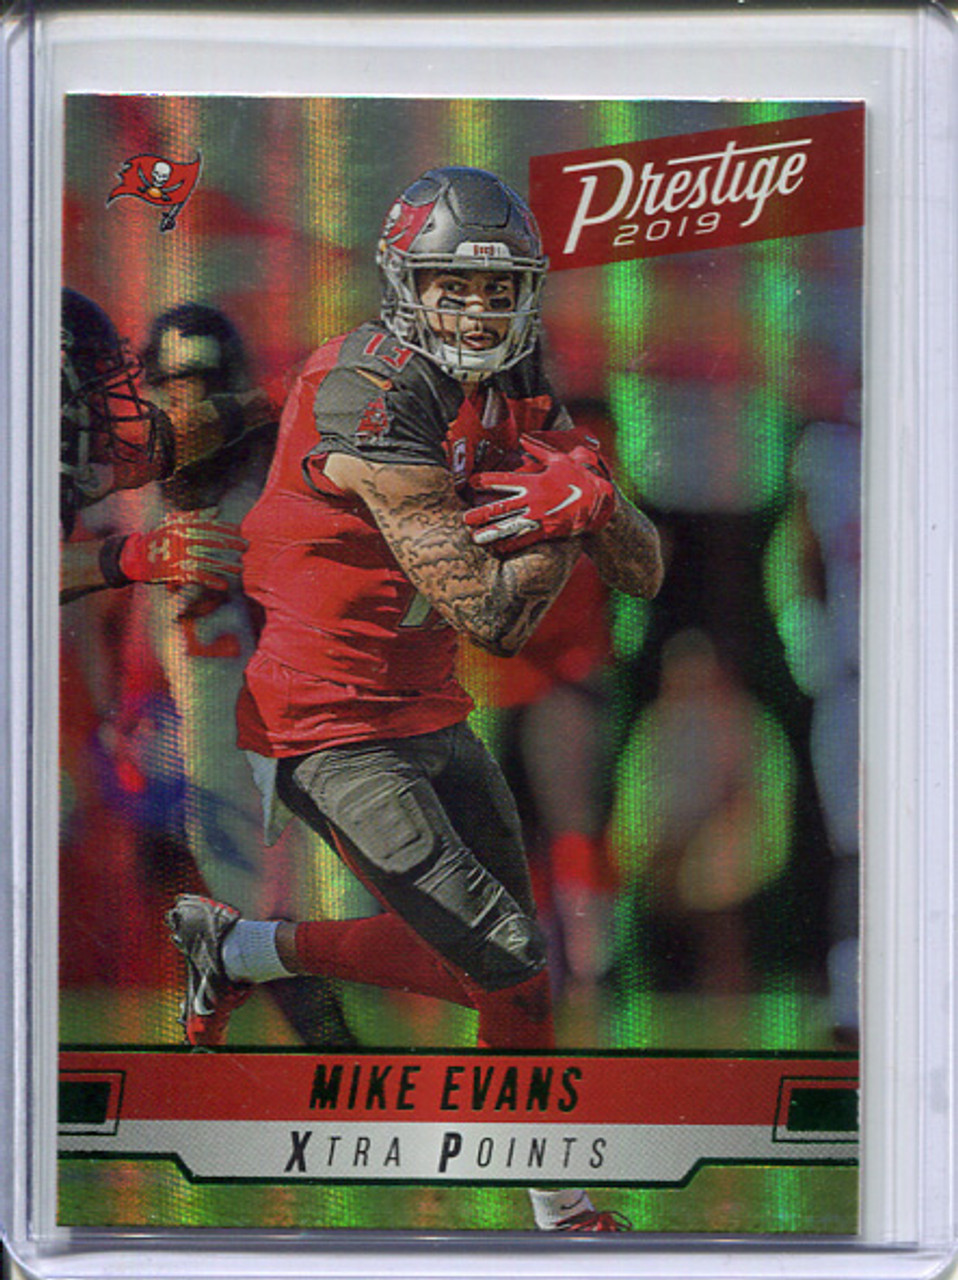 Mike Evans 2019 Prestige #199 Xtra Points Green